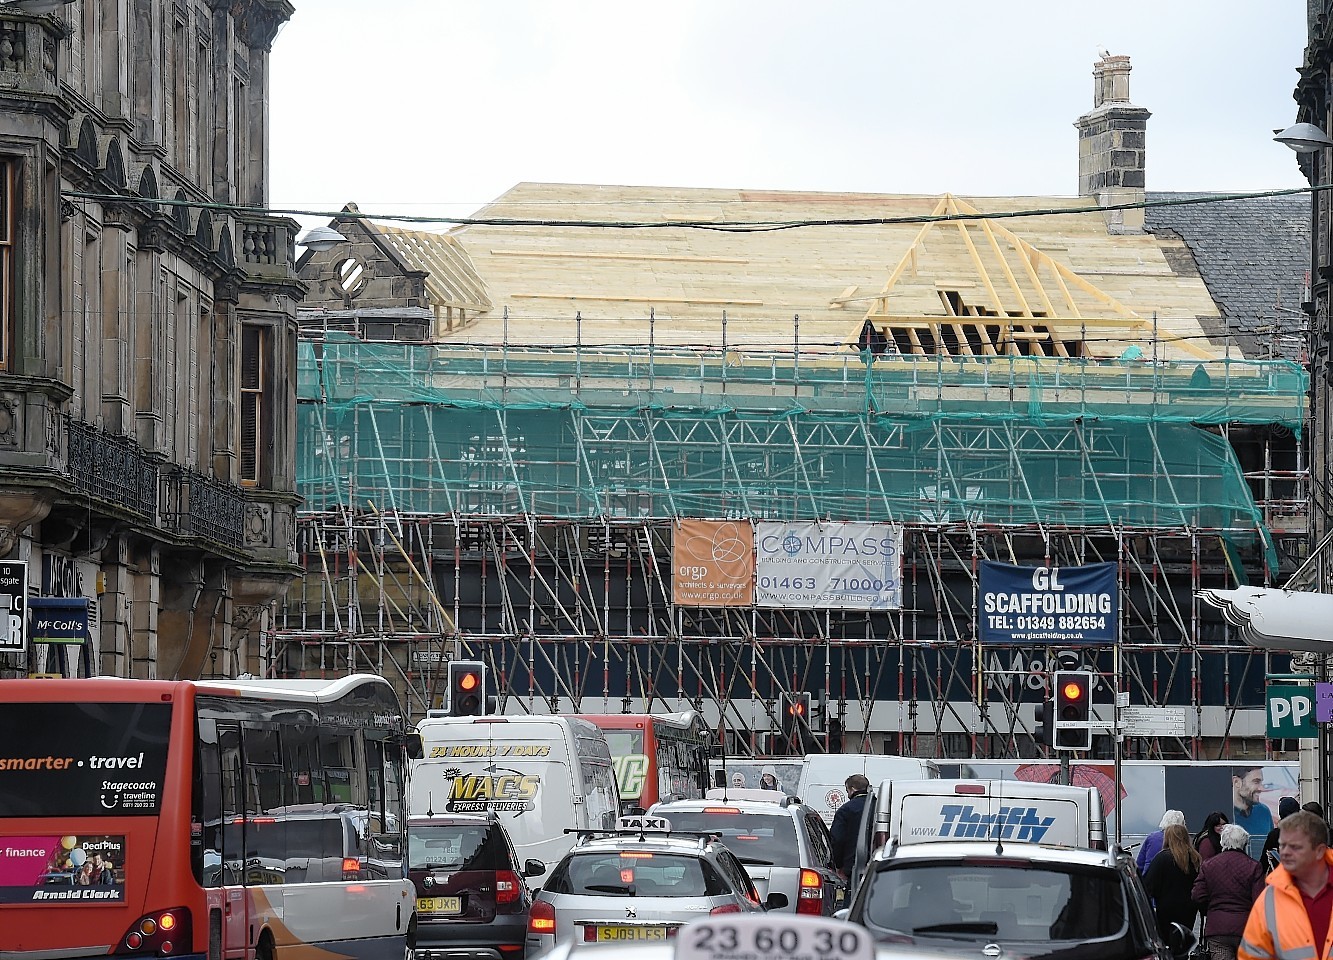 The M&Co  building in Academy Street, Inverness takes shape again following last year's devastating fire.